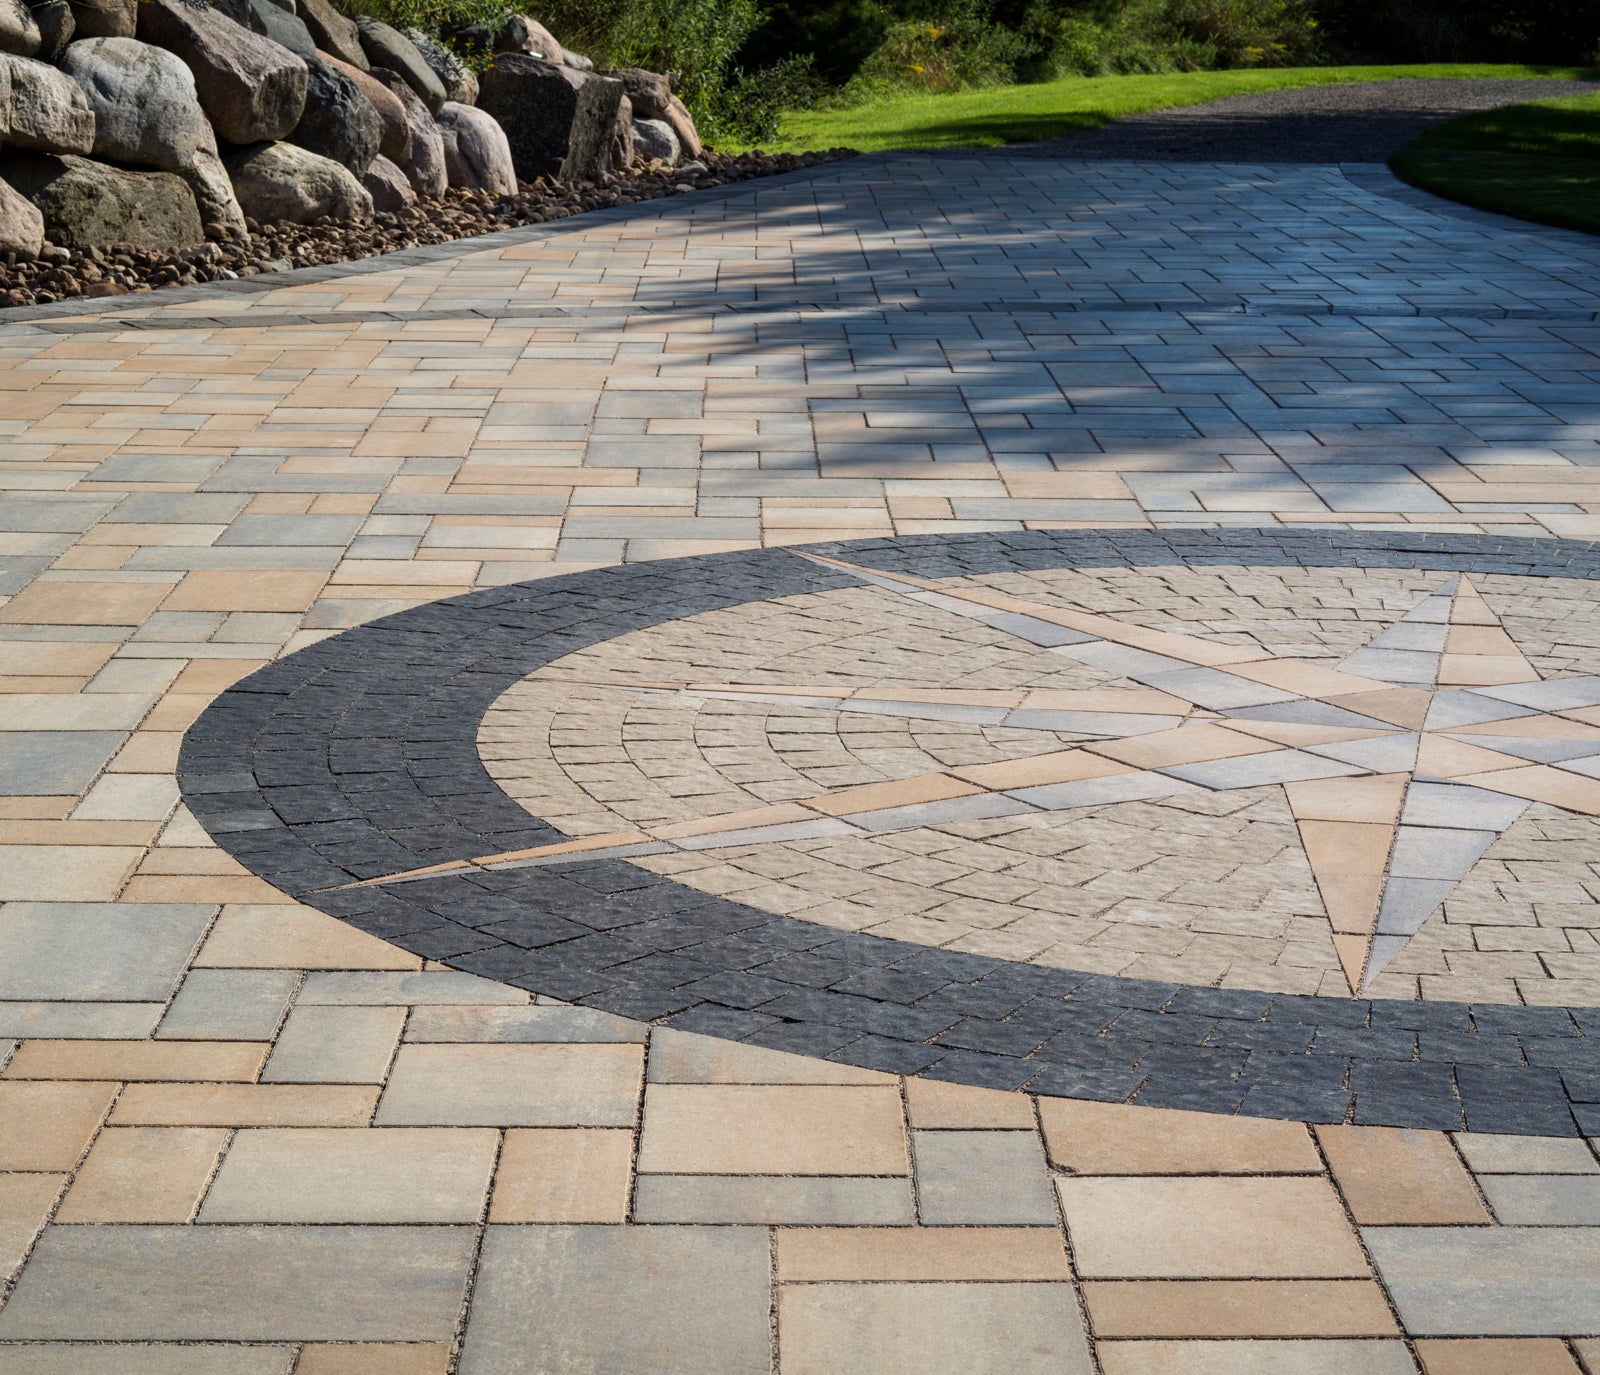 Belgard paver driveway with unique pattern